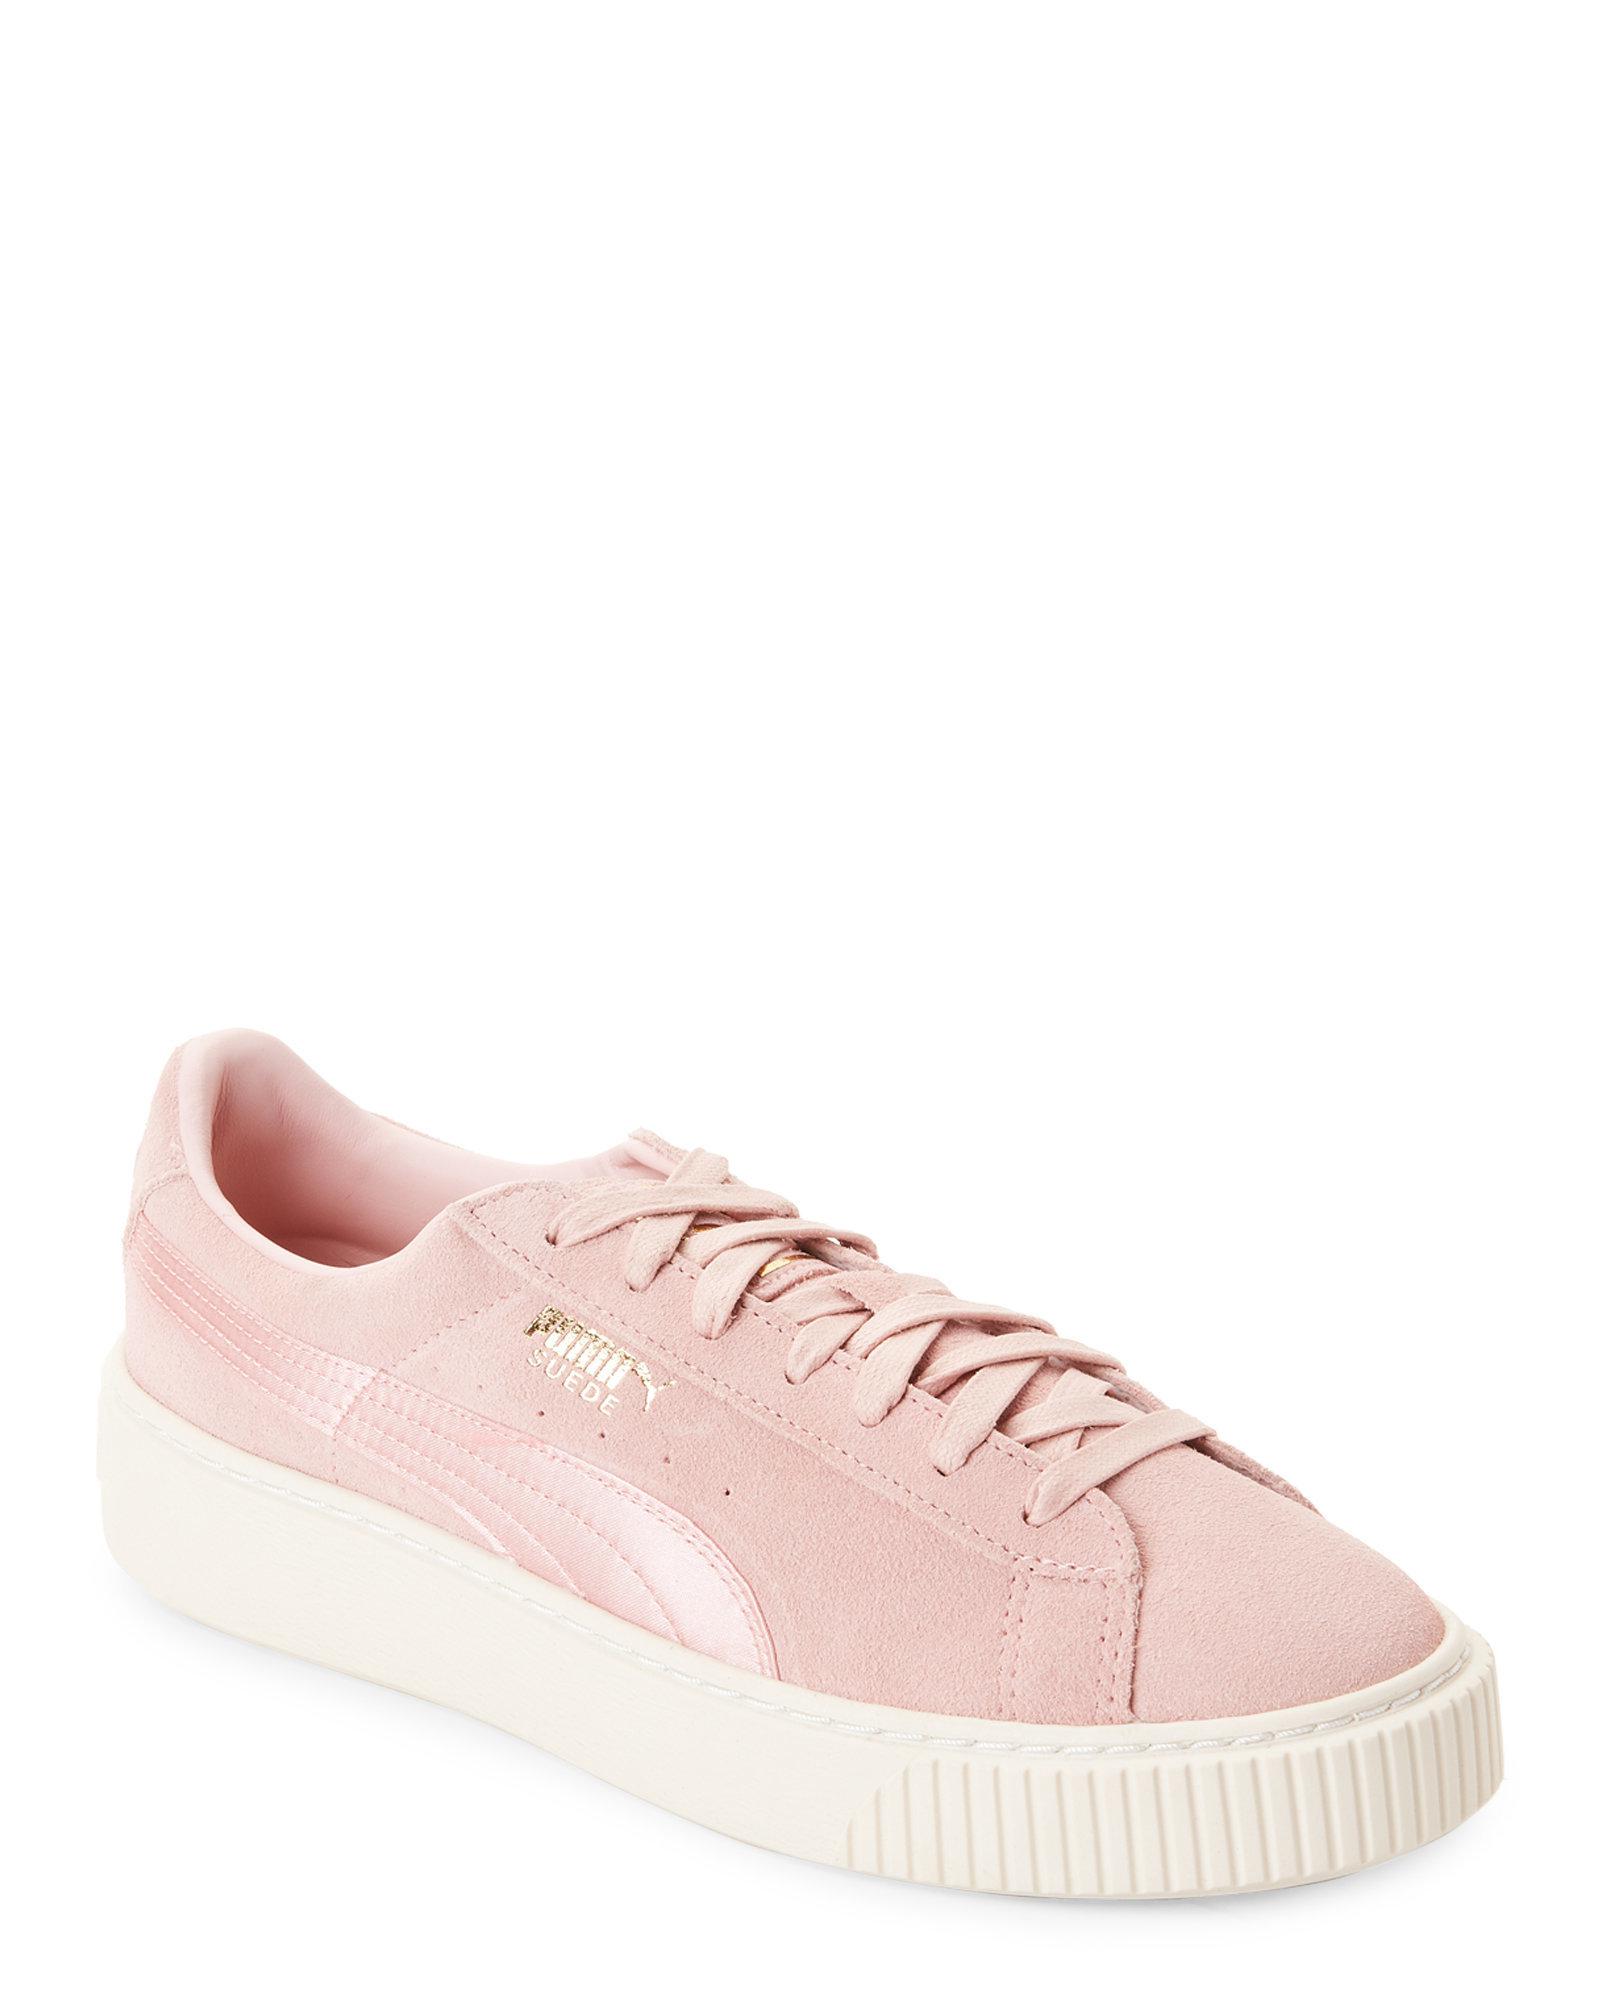 puma baby pink shoes